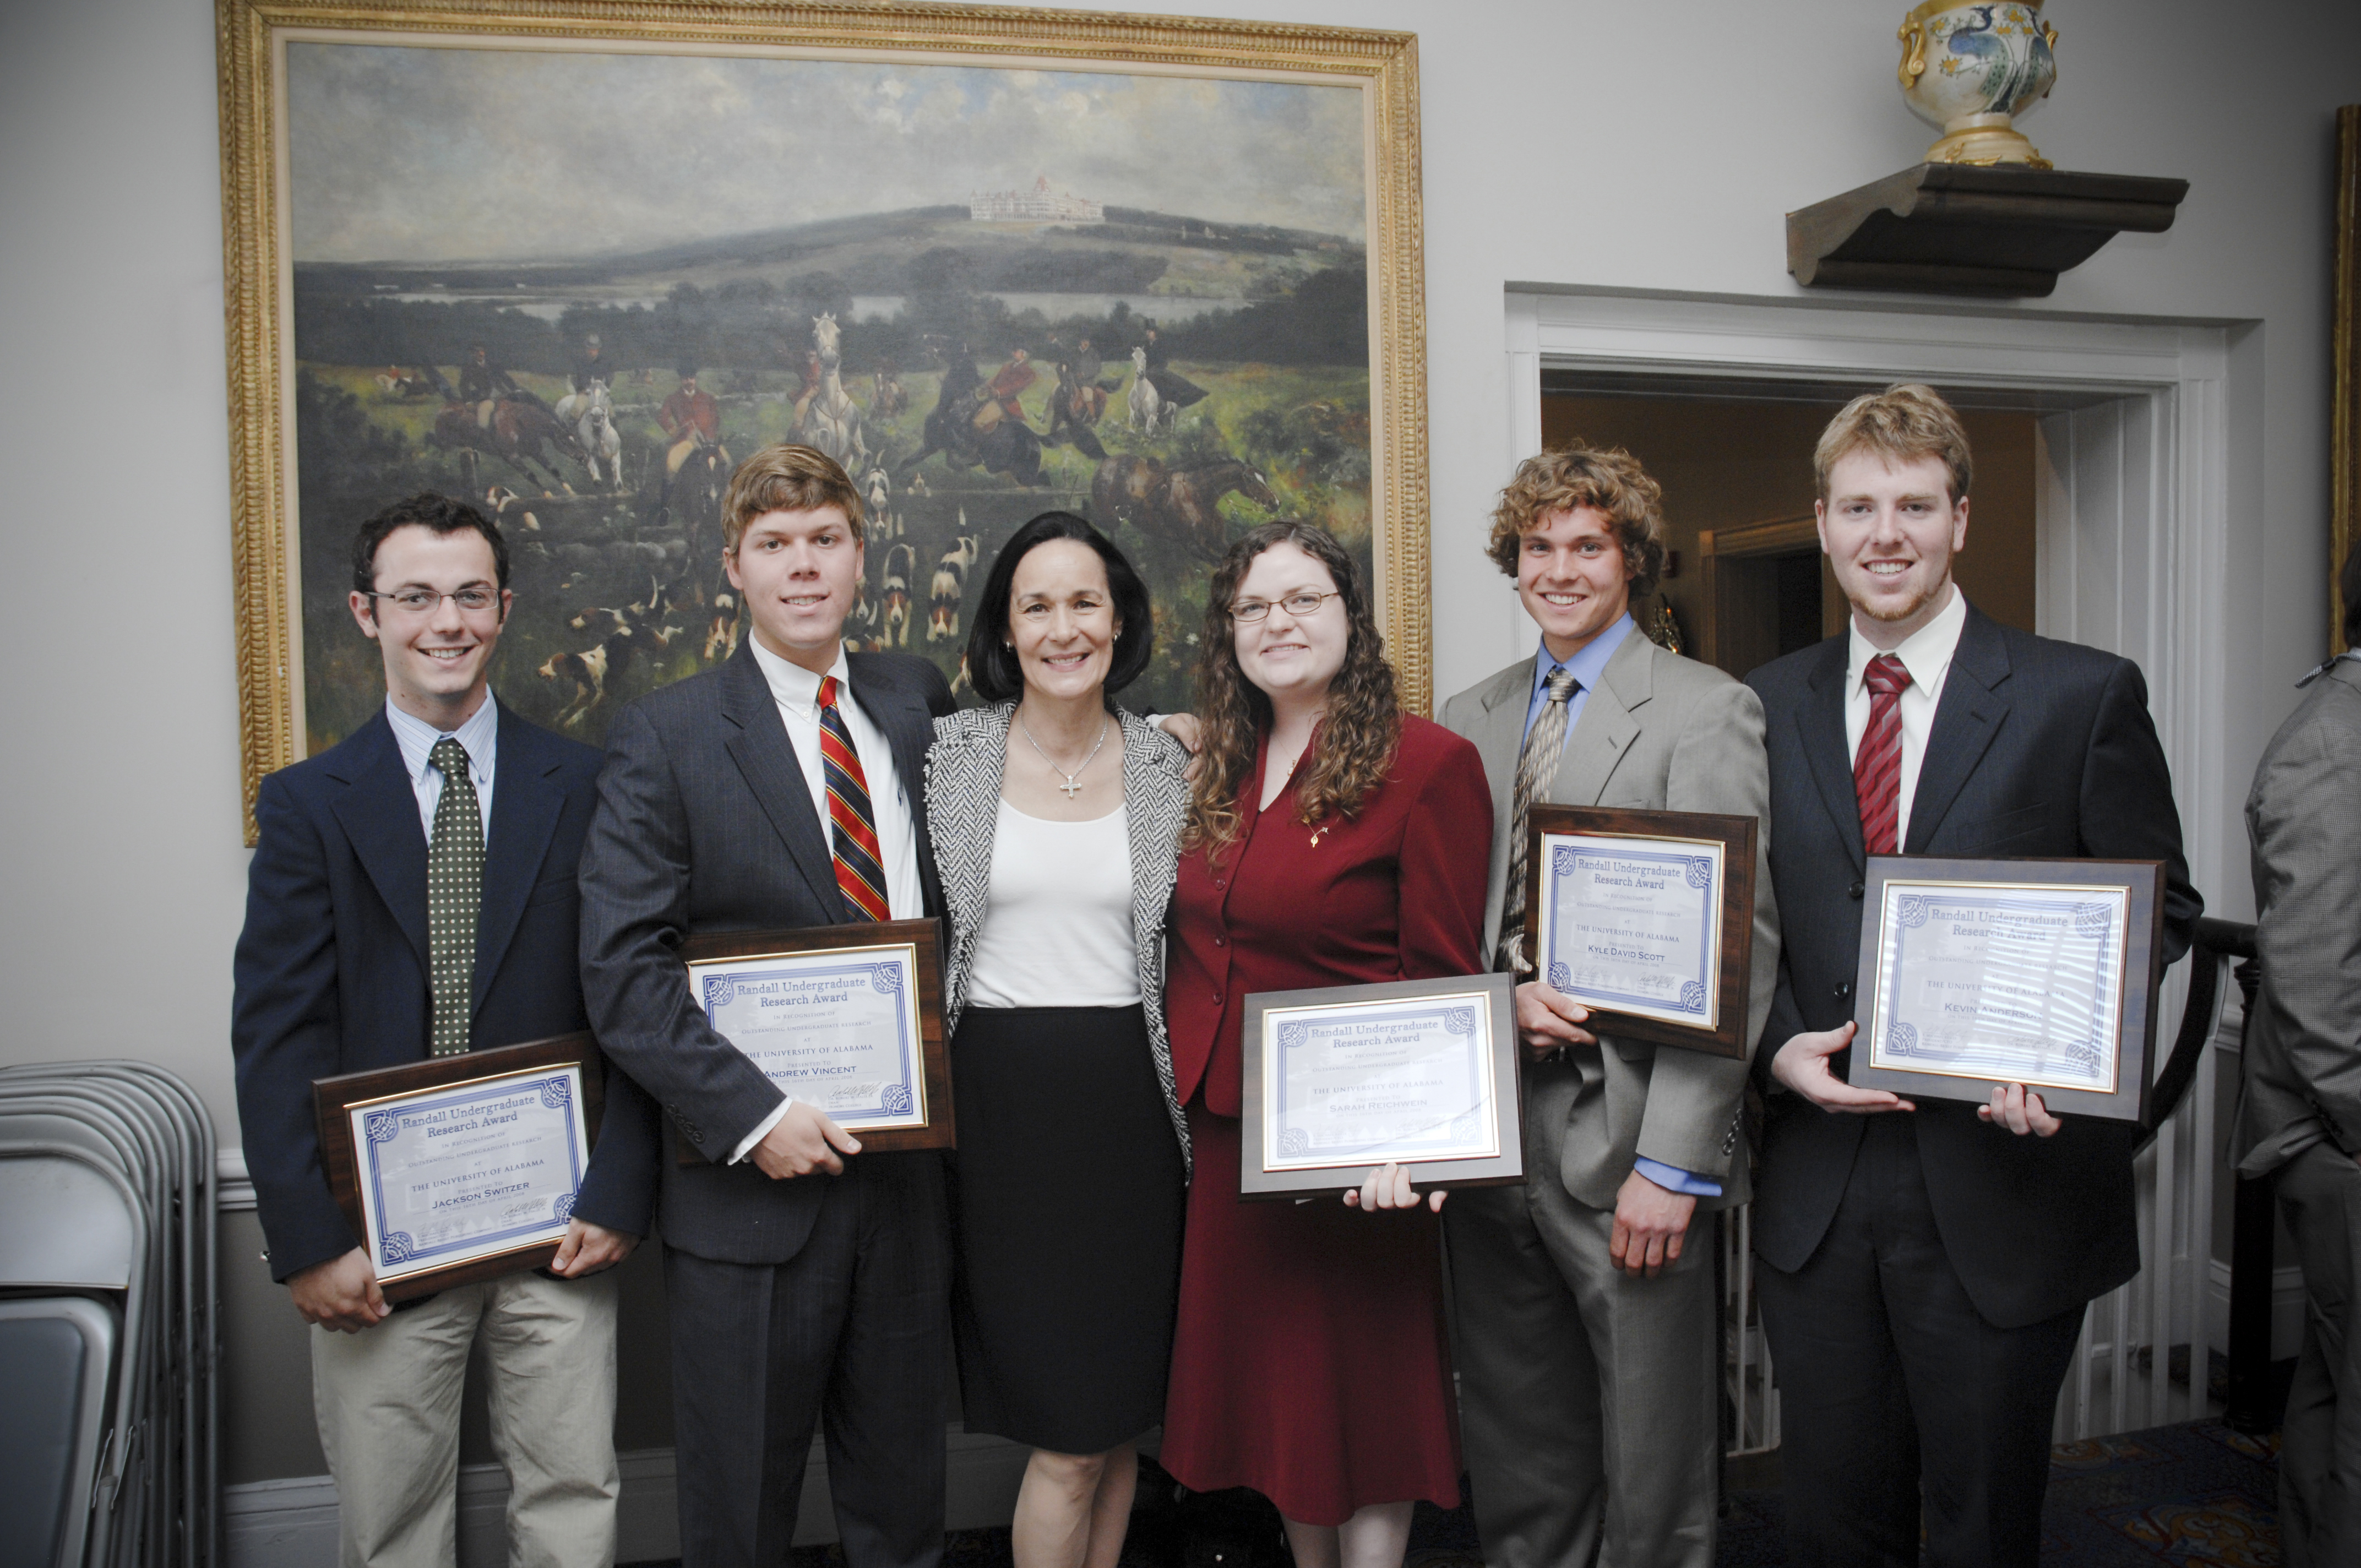 Story Image - Randall Research Award winners with Dr. Randall